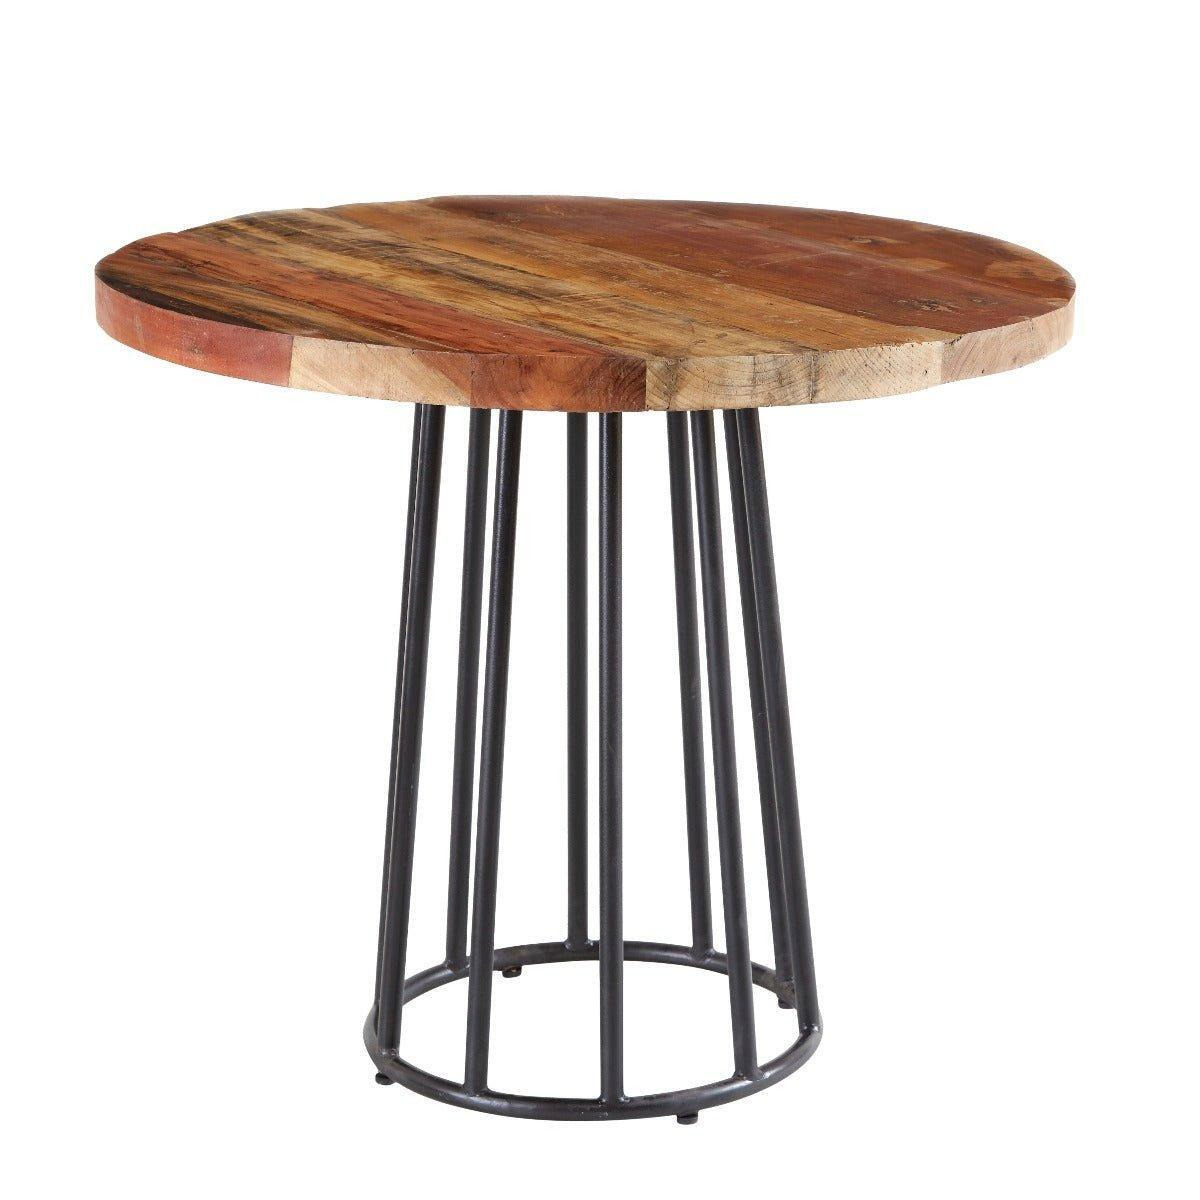 Ted Reclaimed Boat Round Dining Table - image 1